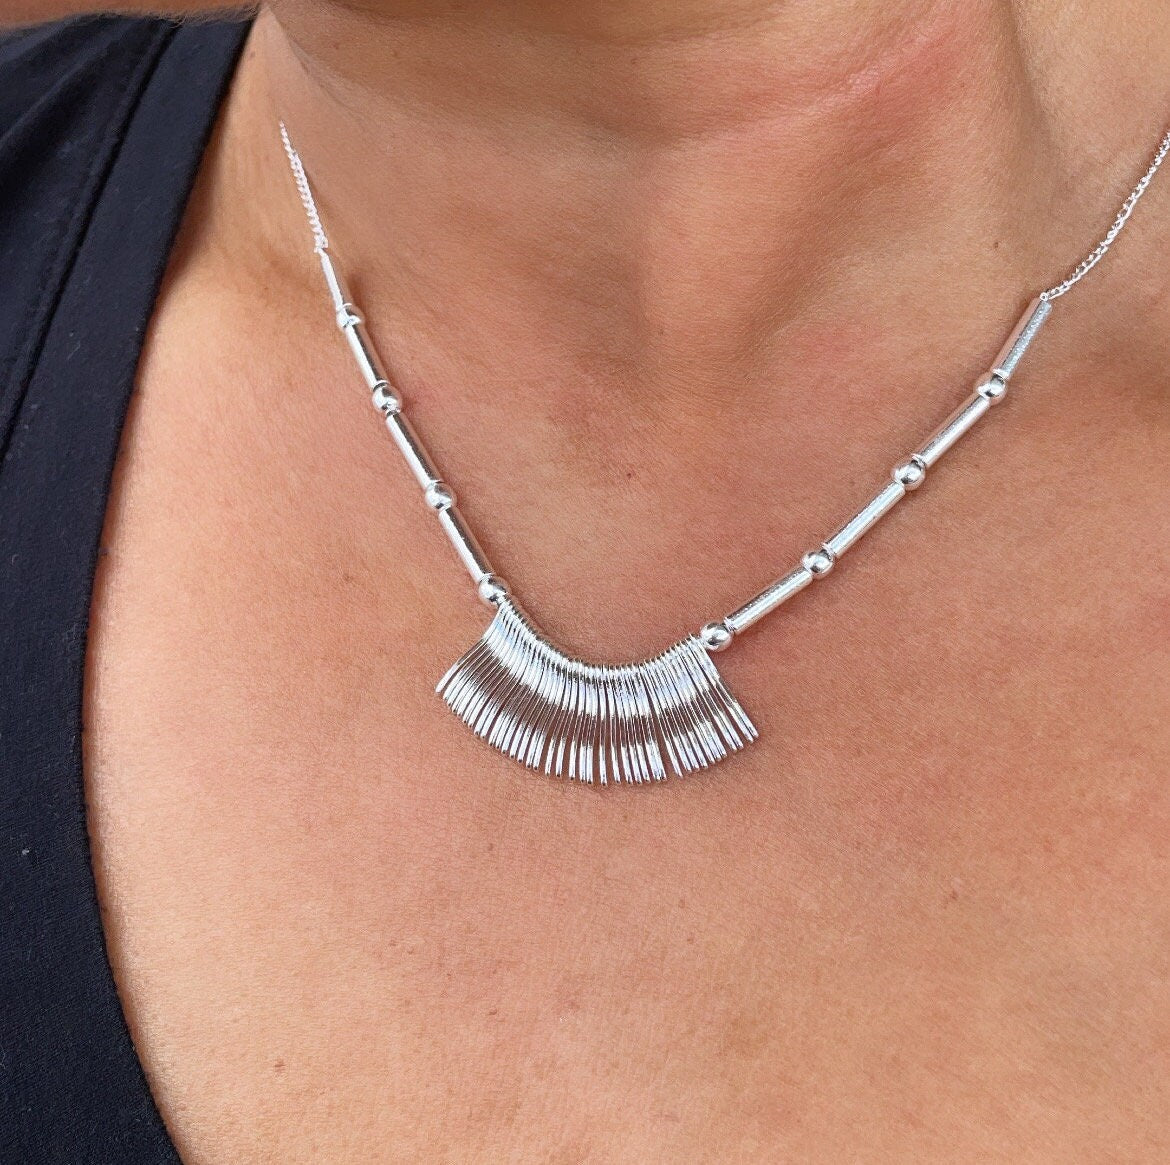 Silver Layered Fringe Necklace Featuring Tubes And Beads For Complete Boho